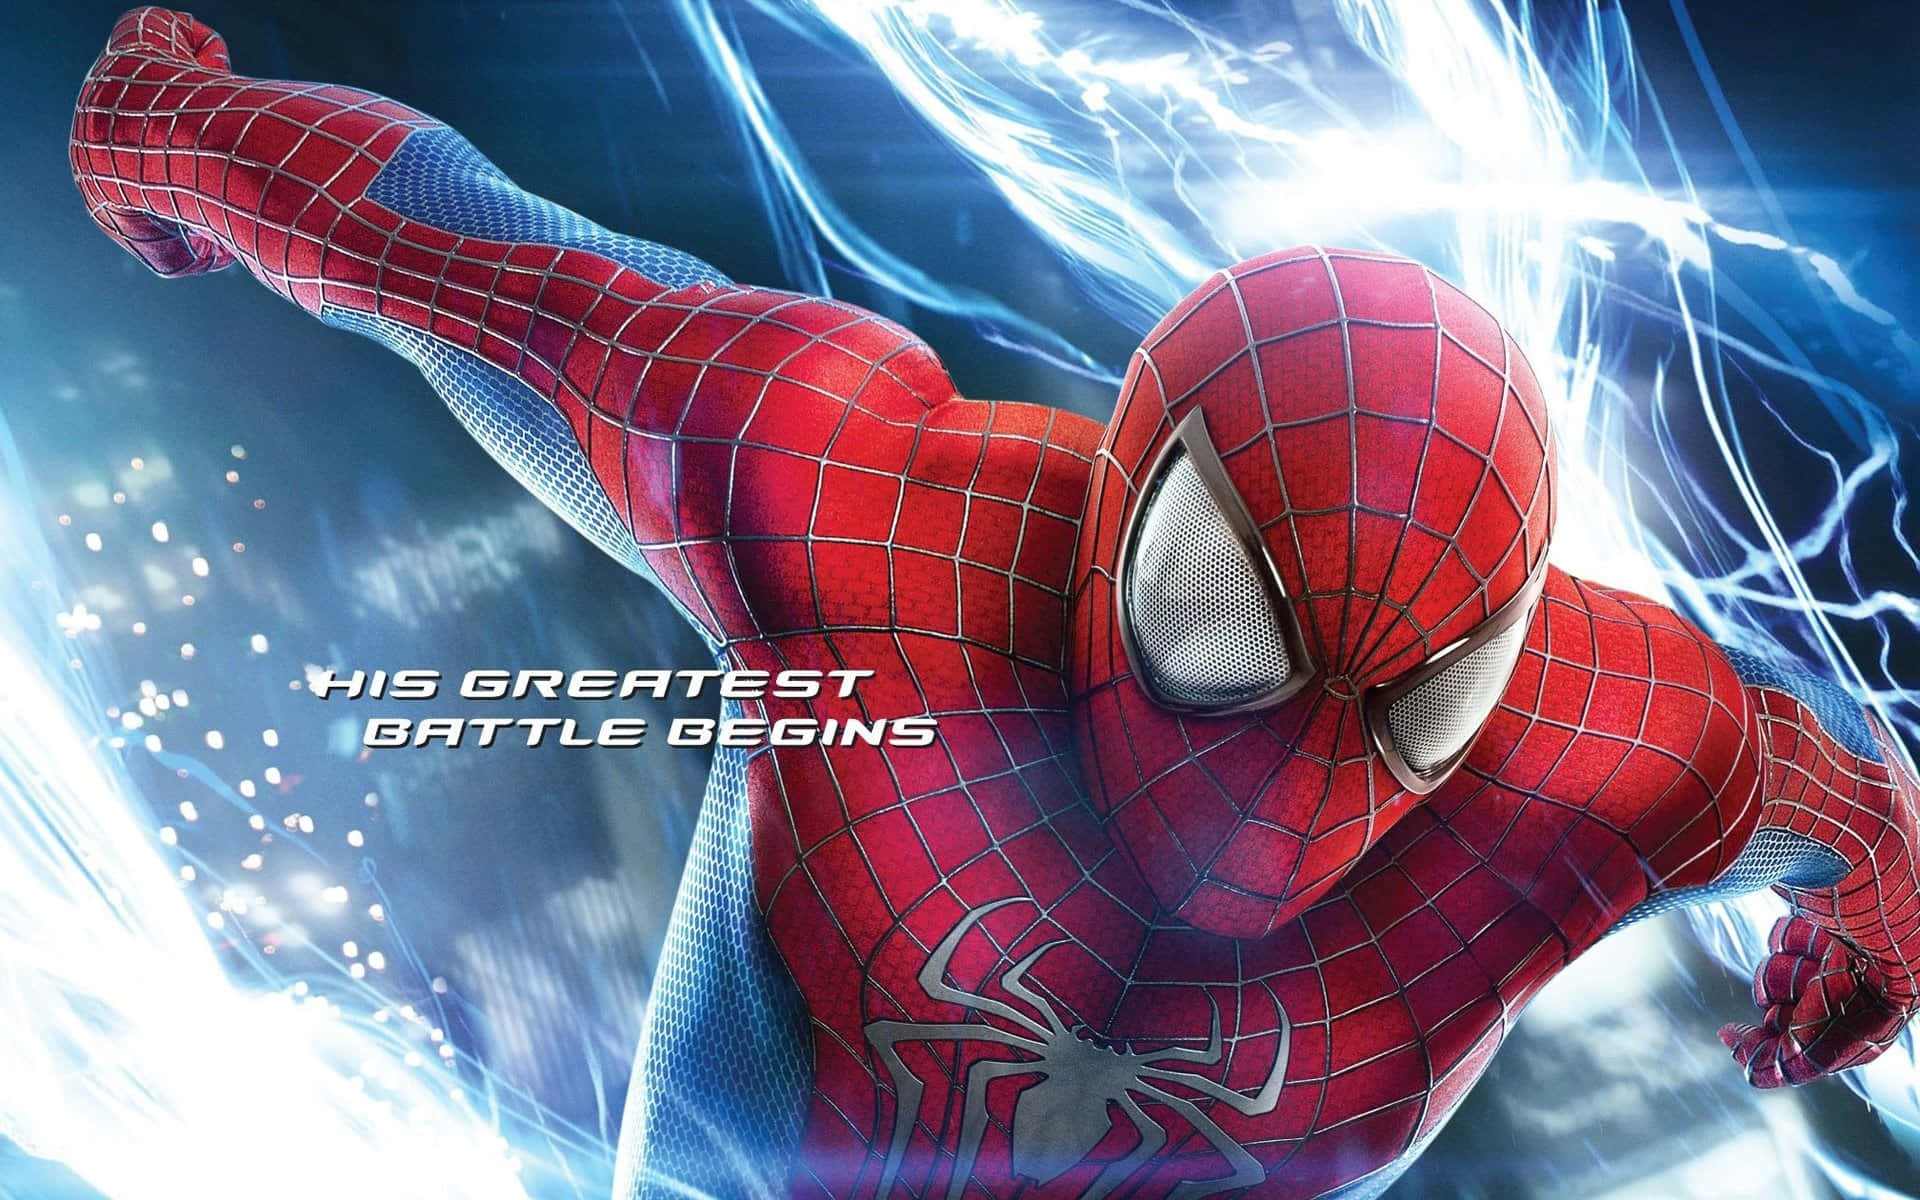 Experience the Amazing Power of Spiderman!